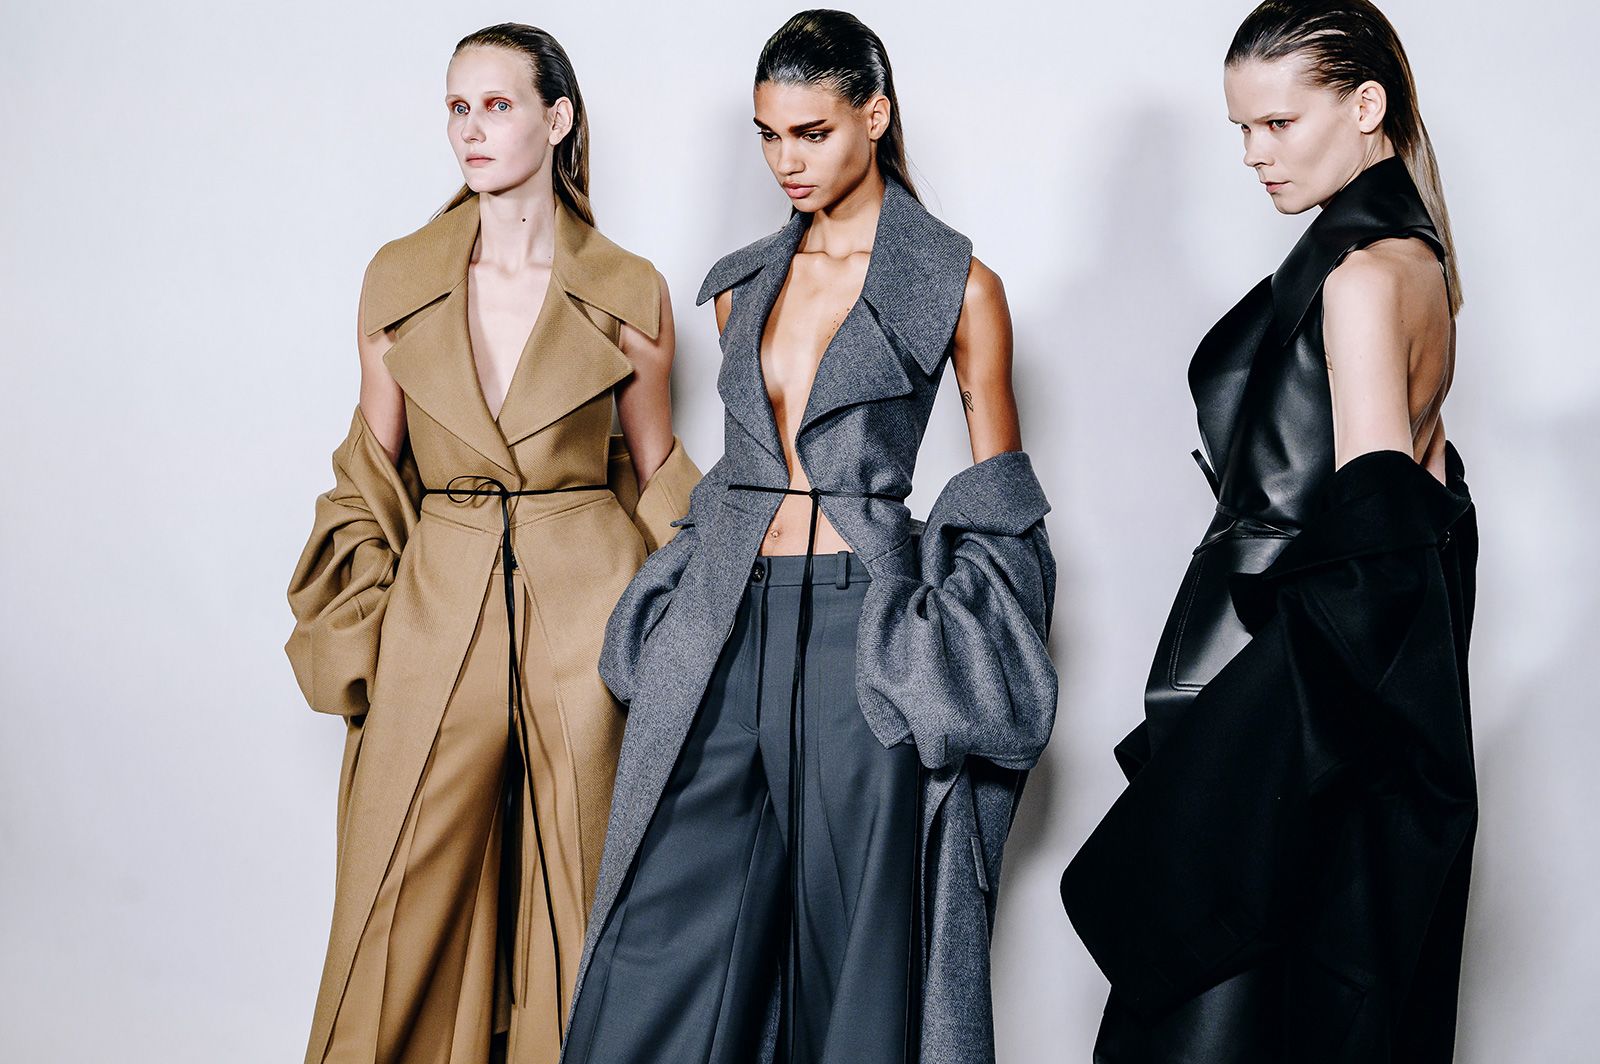 New Designer Peter Do Sets Own Path in Saturated Fashion Market – WWD